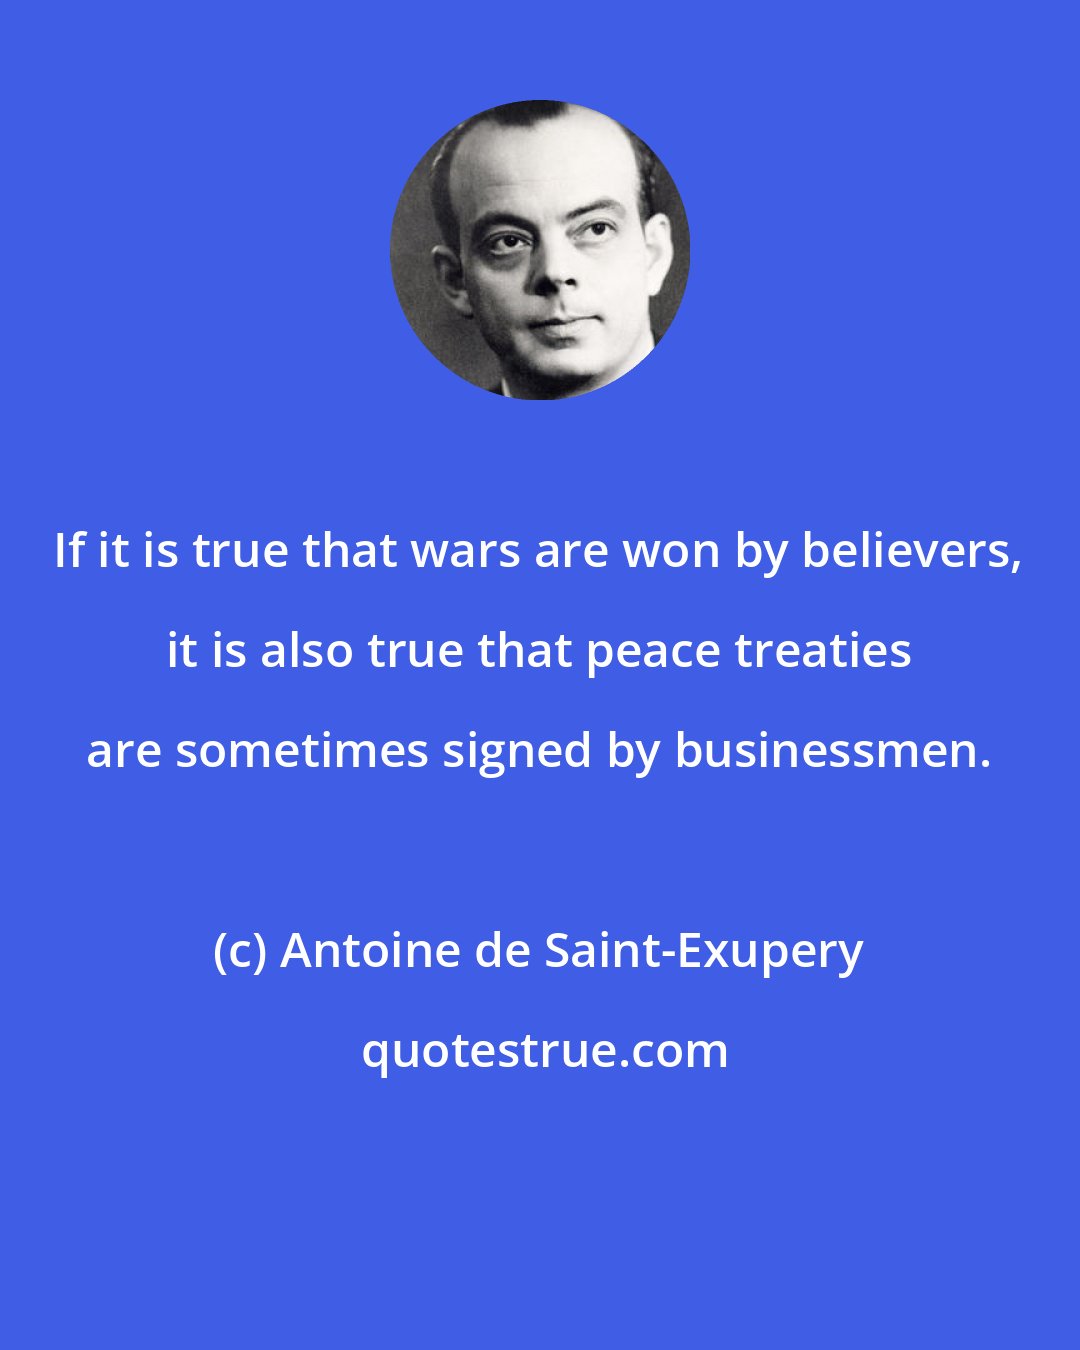 Antoine de Saint-Exupery: If it is true that wars are won by believers, it is also true that peace treaties are sometimes signed by businessmen.